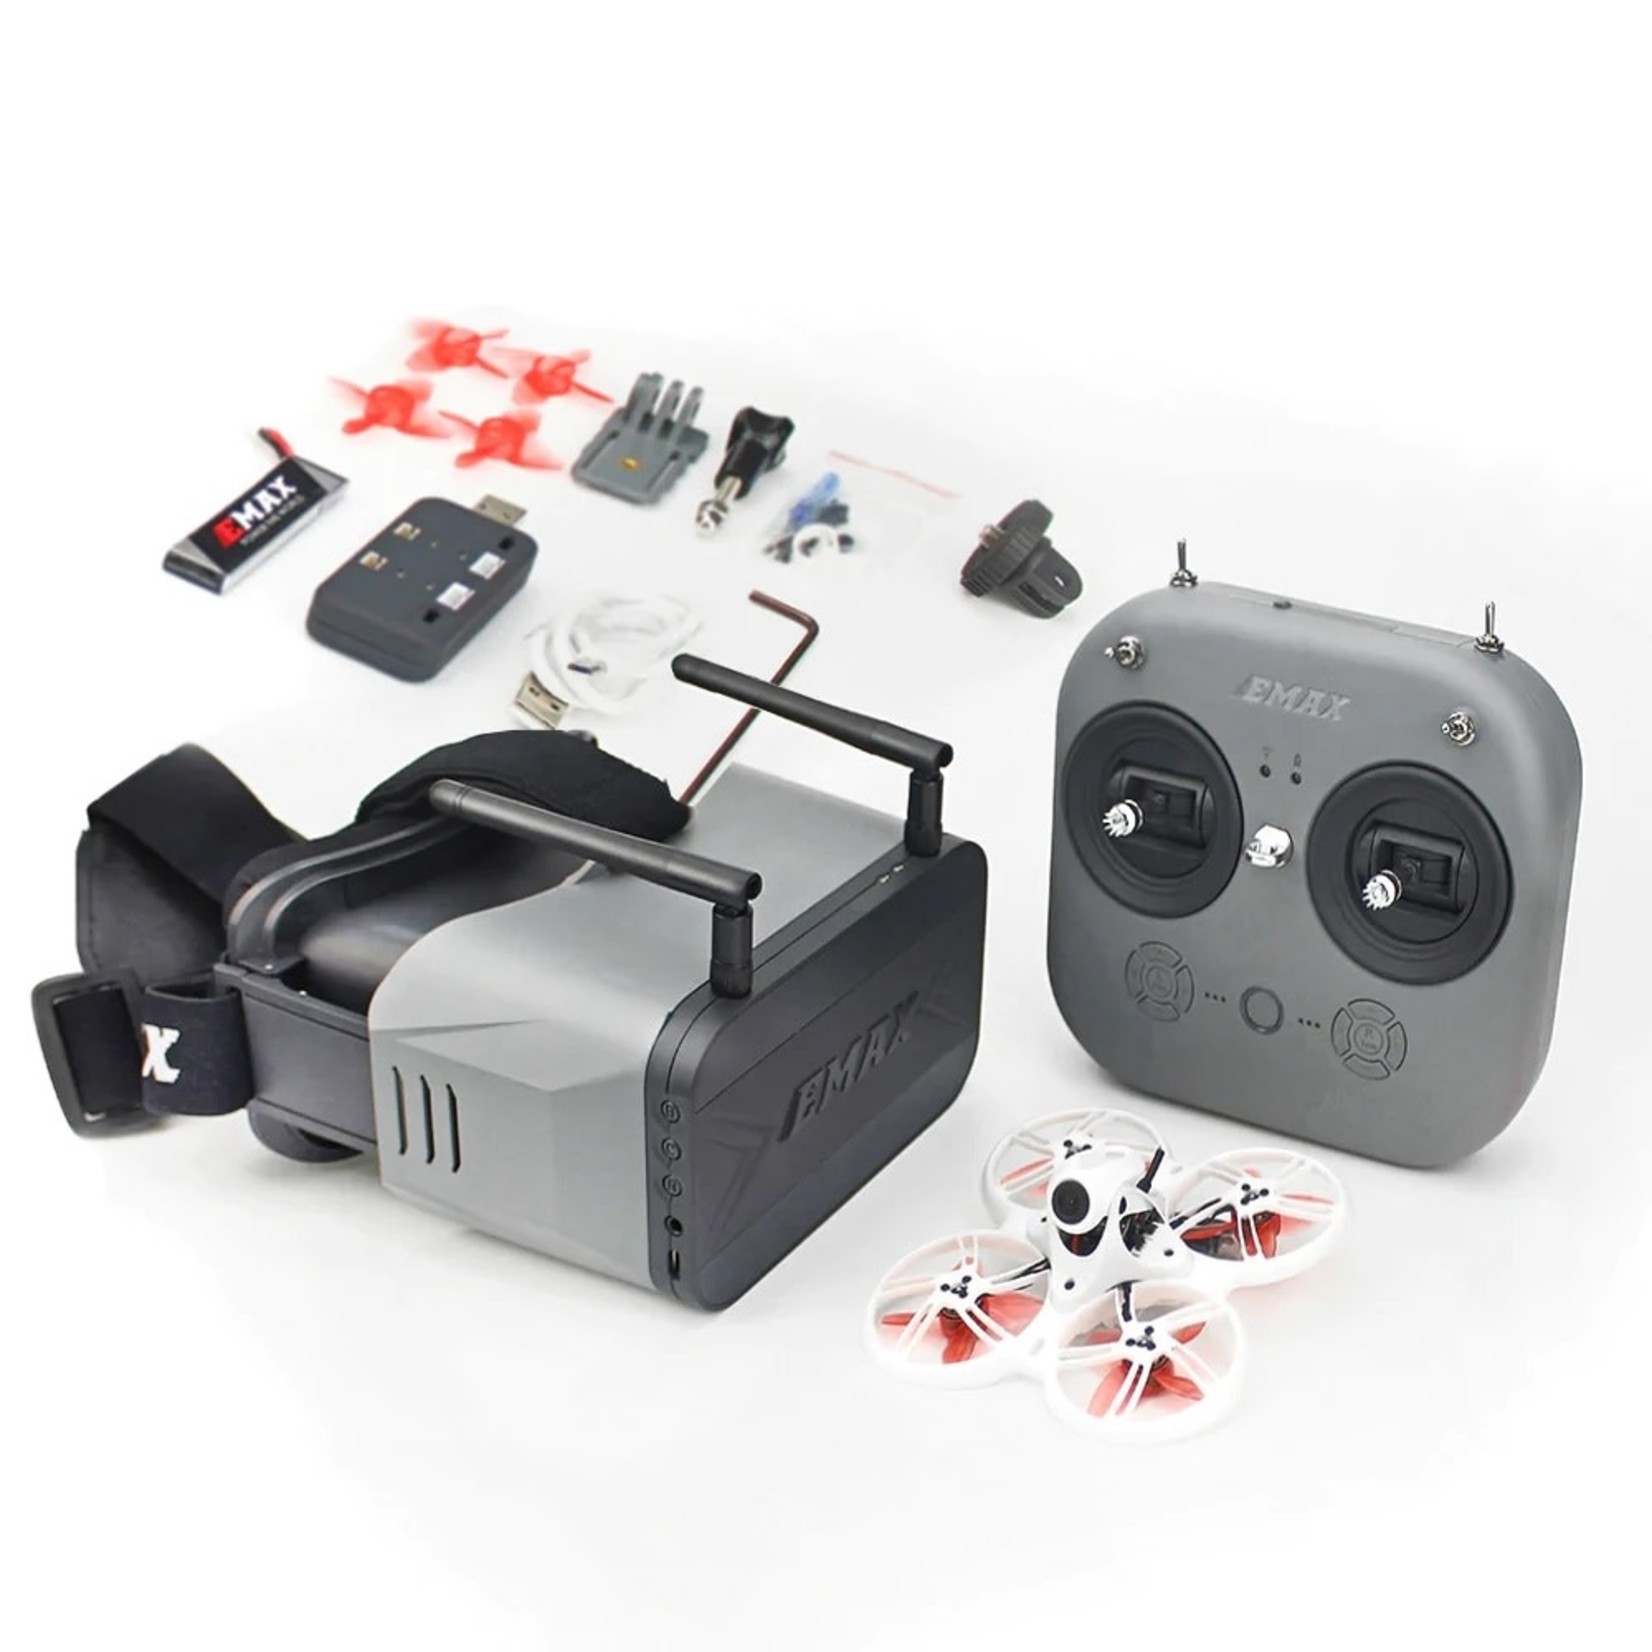 EMAX EMAX USA Tinyhawk III FPV Racing Drone - Ready to Fly (RTF) w/Controller and Goggles #0110001121